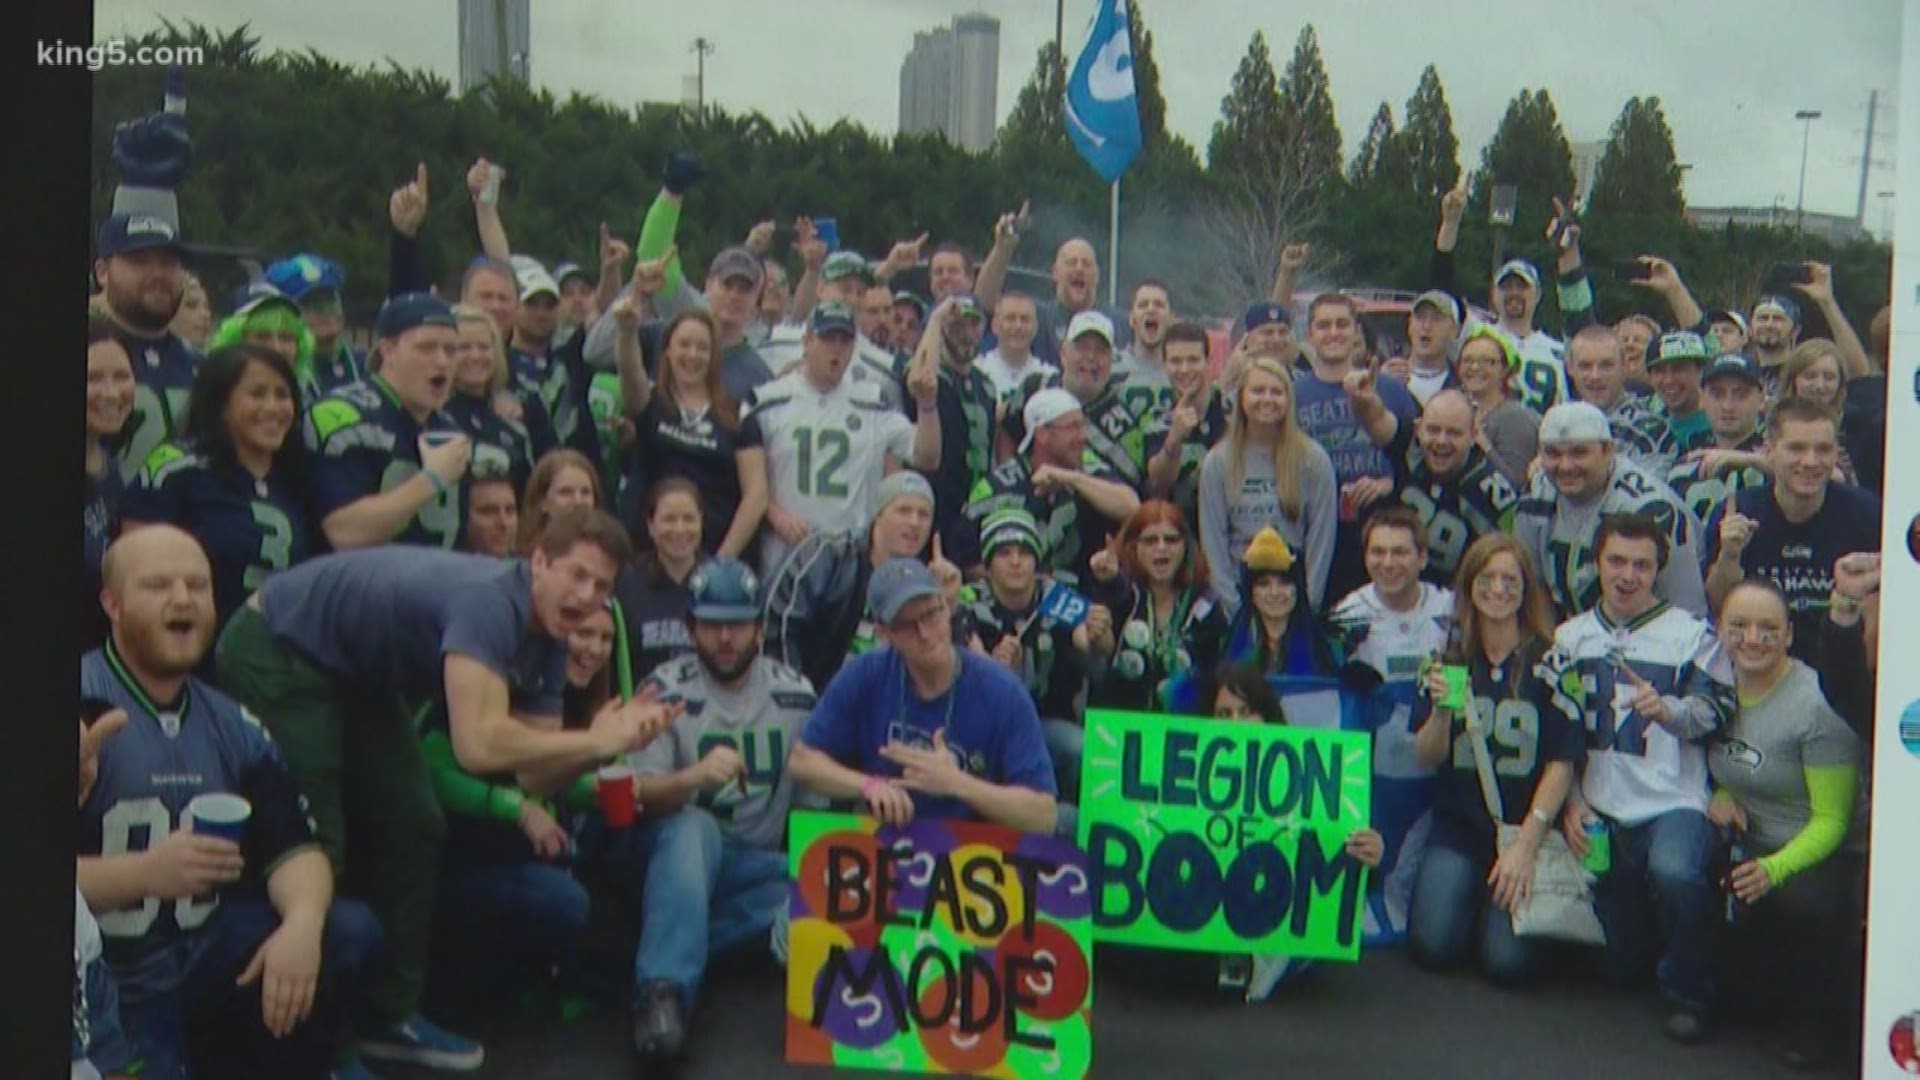 Seahawks fans are gearing up to hit the road in droves to support Seattle in Wisconsin.